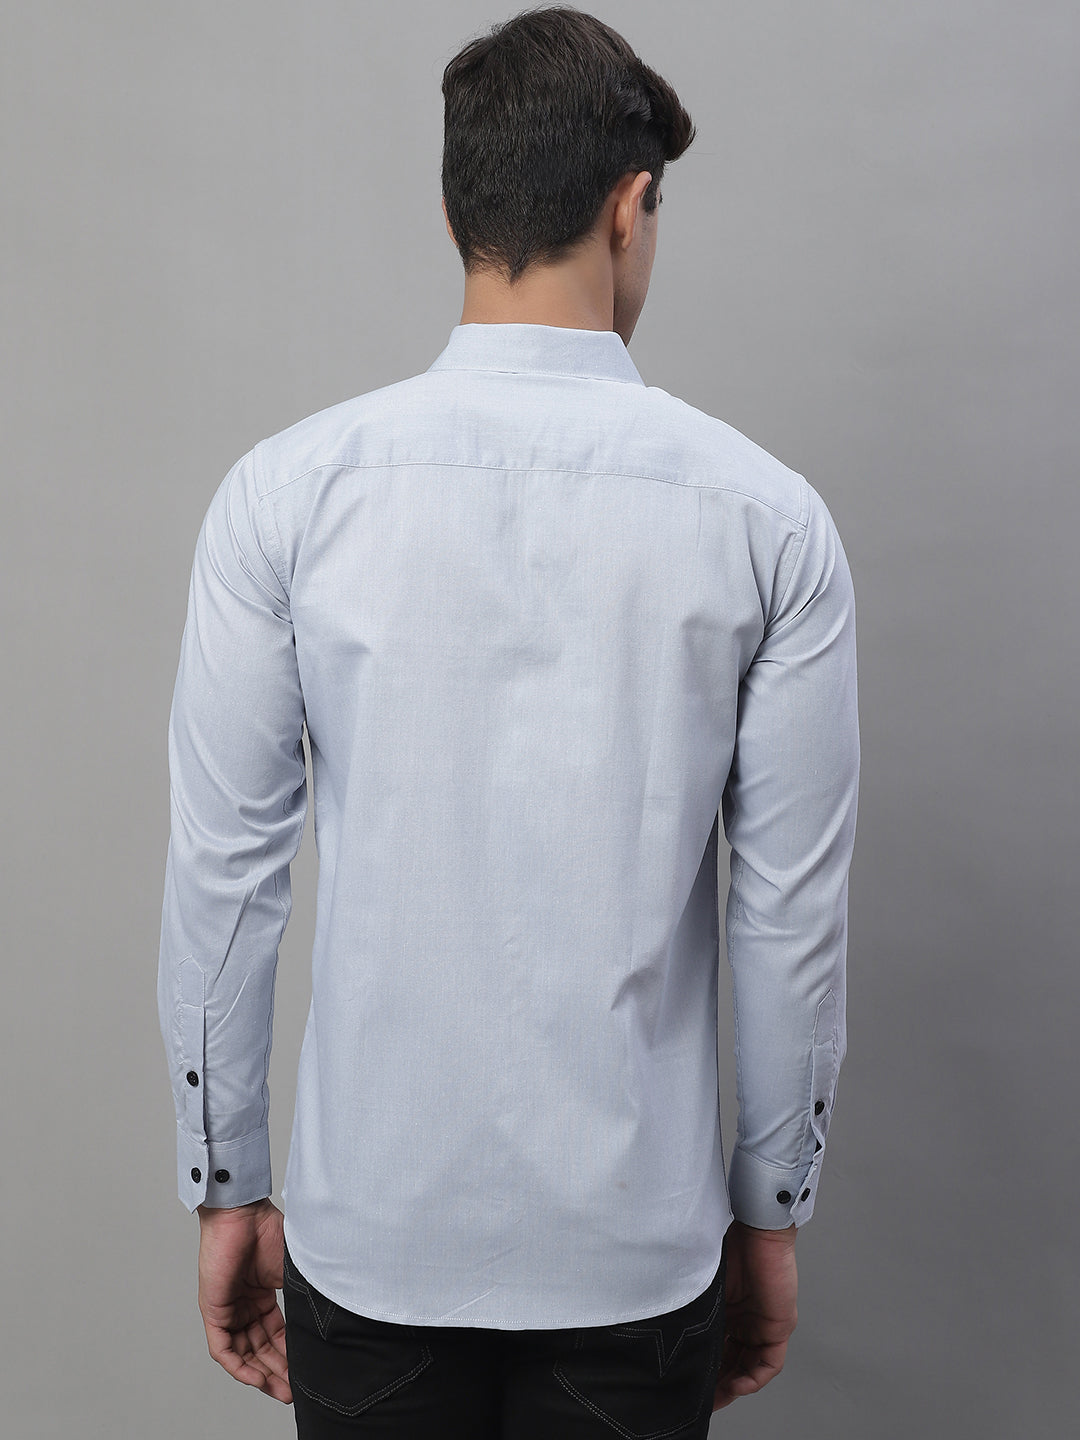 Unique and Classy Casual Shirt - Ice Blue